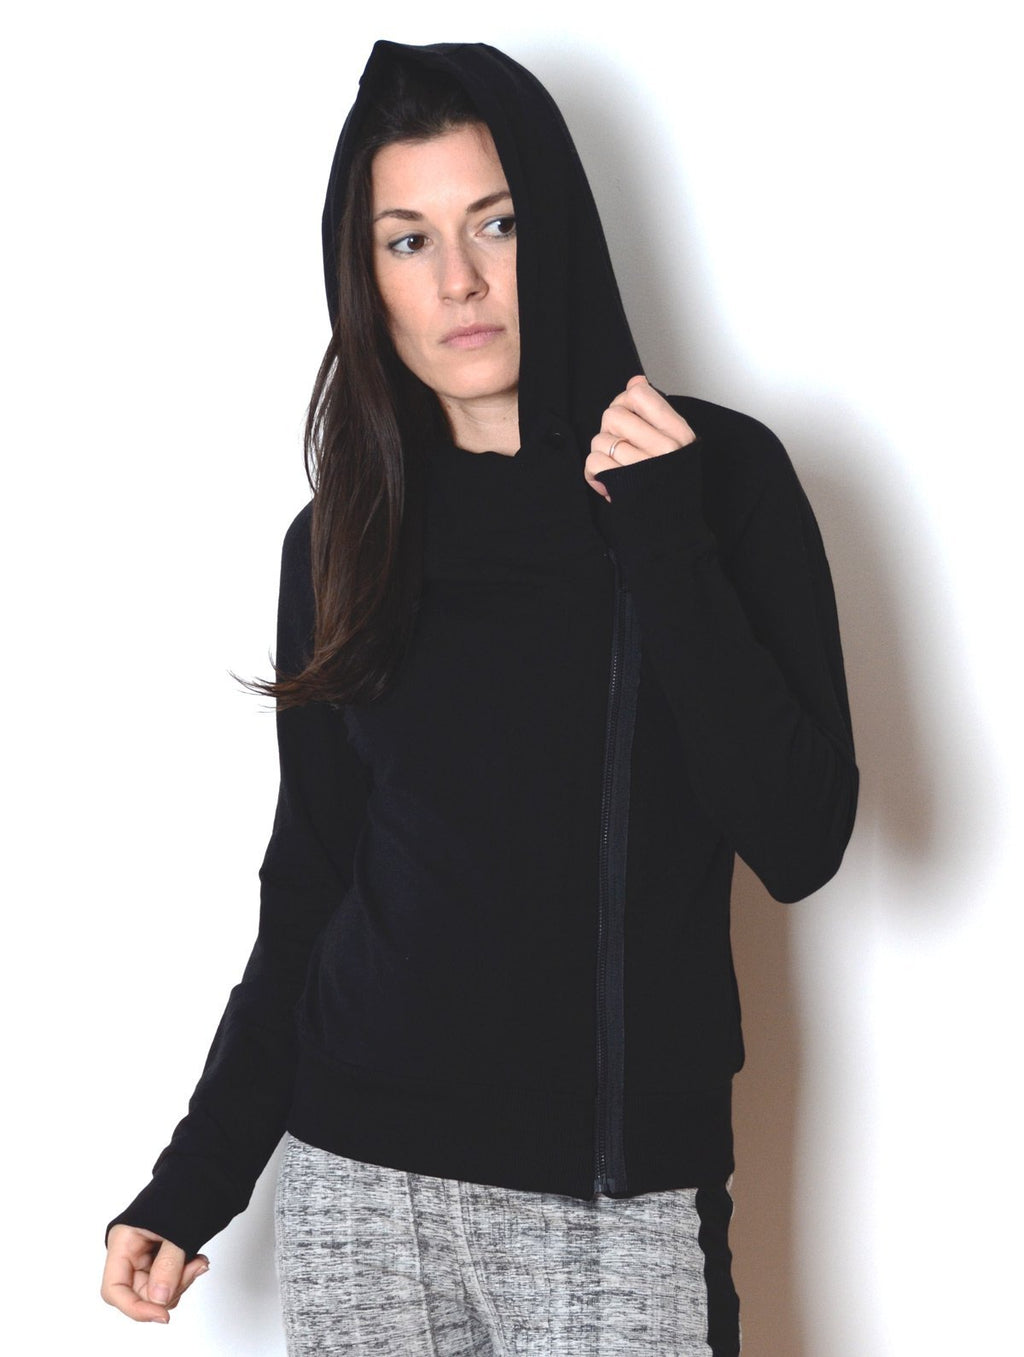 Front view of model wearing  simulacra's women's Black Cowl Neck Hoodie Sweater in a pose showing the assymetrical cut profile